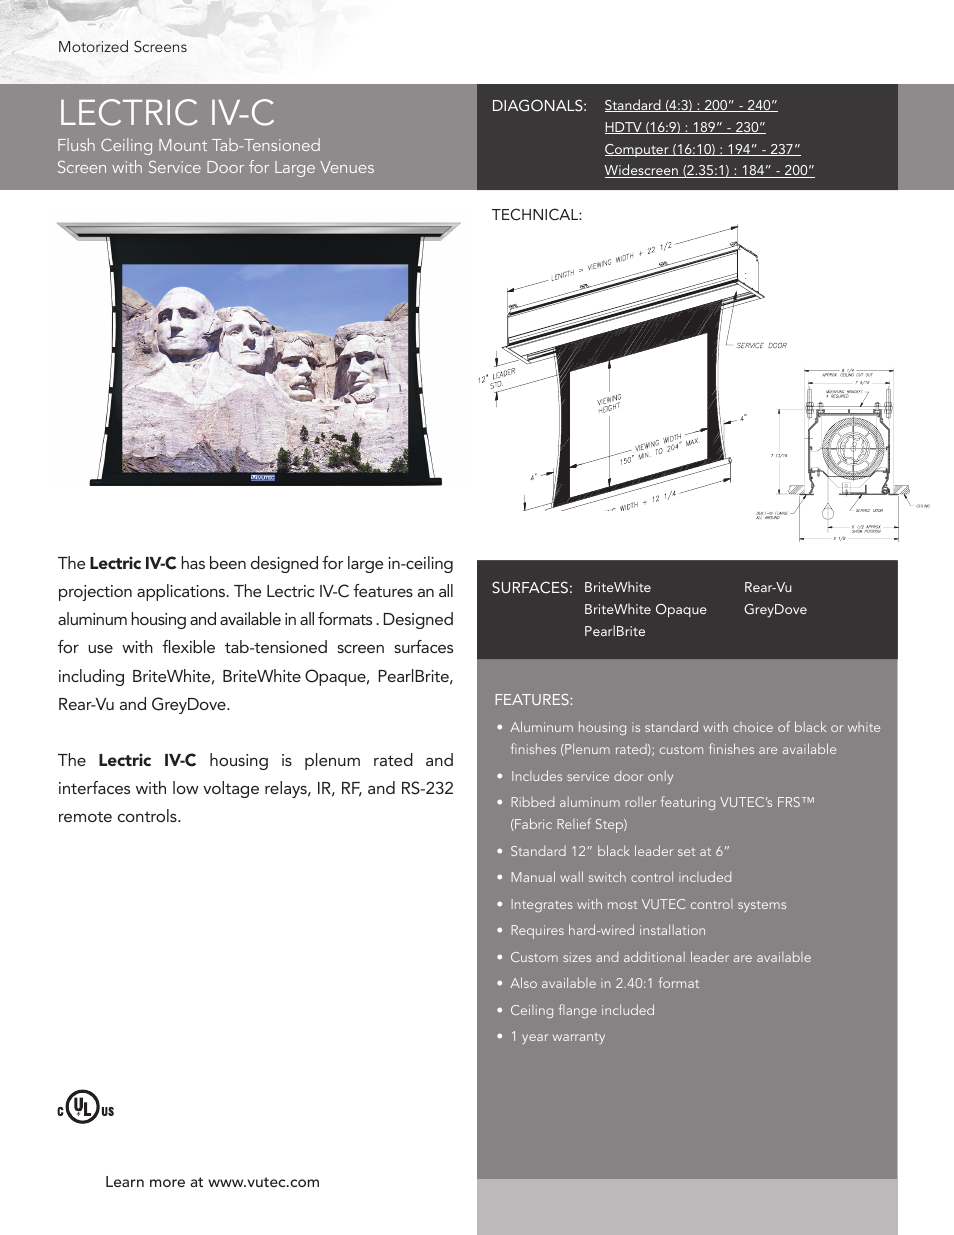 Vutec LECTRIC IV-C - Product Sheet User Manual | 1 page